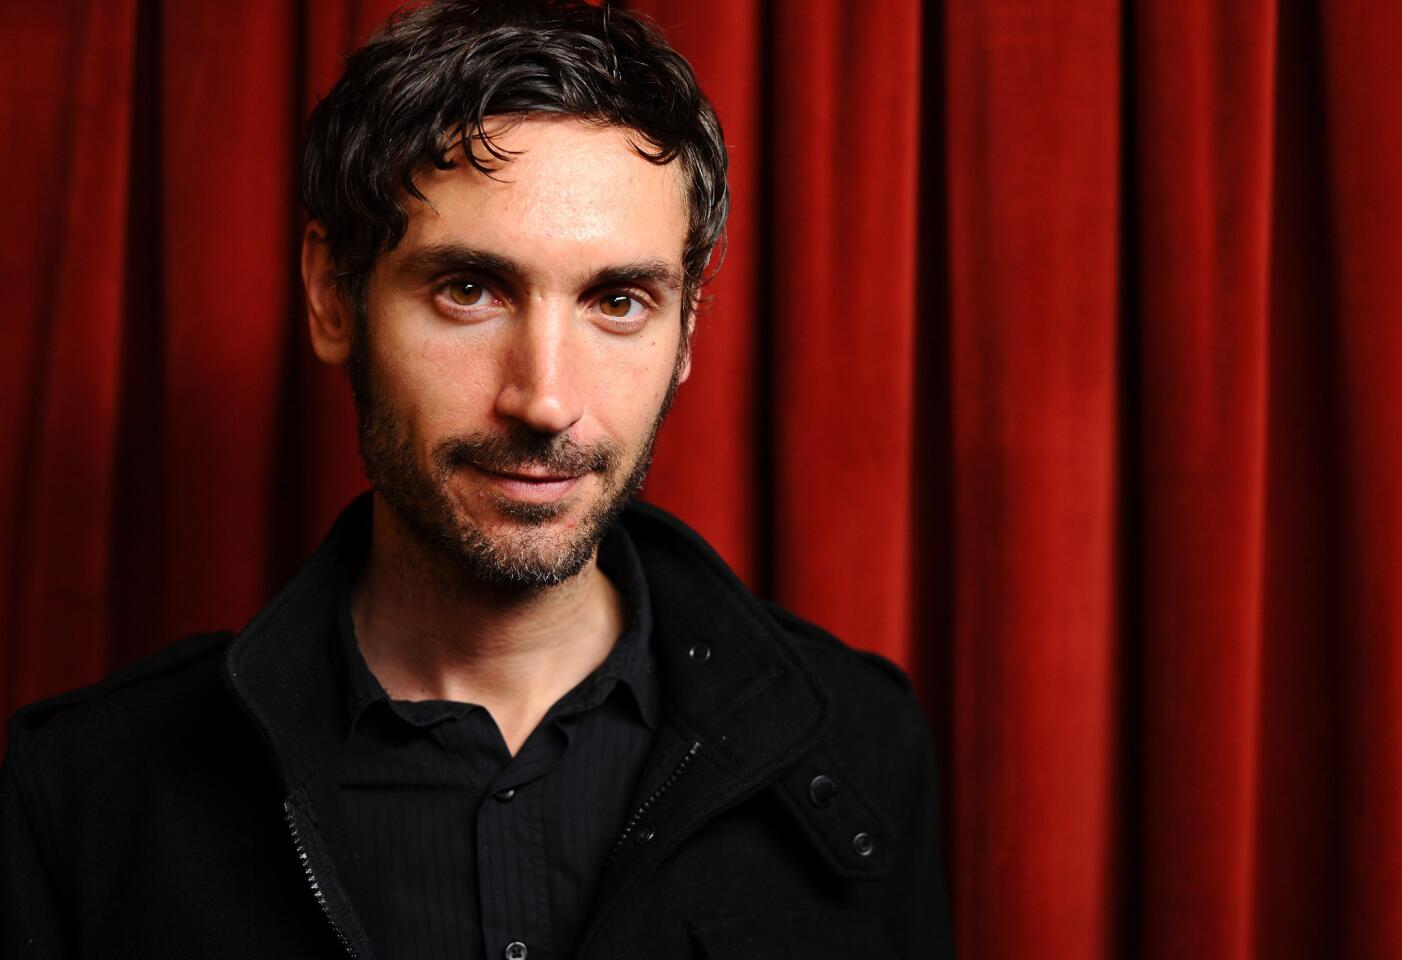 Director Malik Bendjelloul attends the "Searching for Sugar Man" Greenroom Photo Op during the 2012 SXSW Music, Film + Interactive Festival.